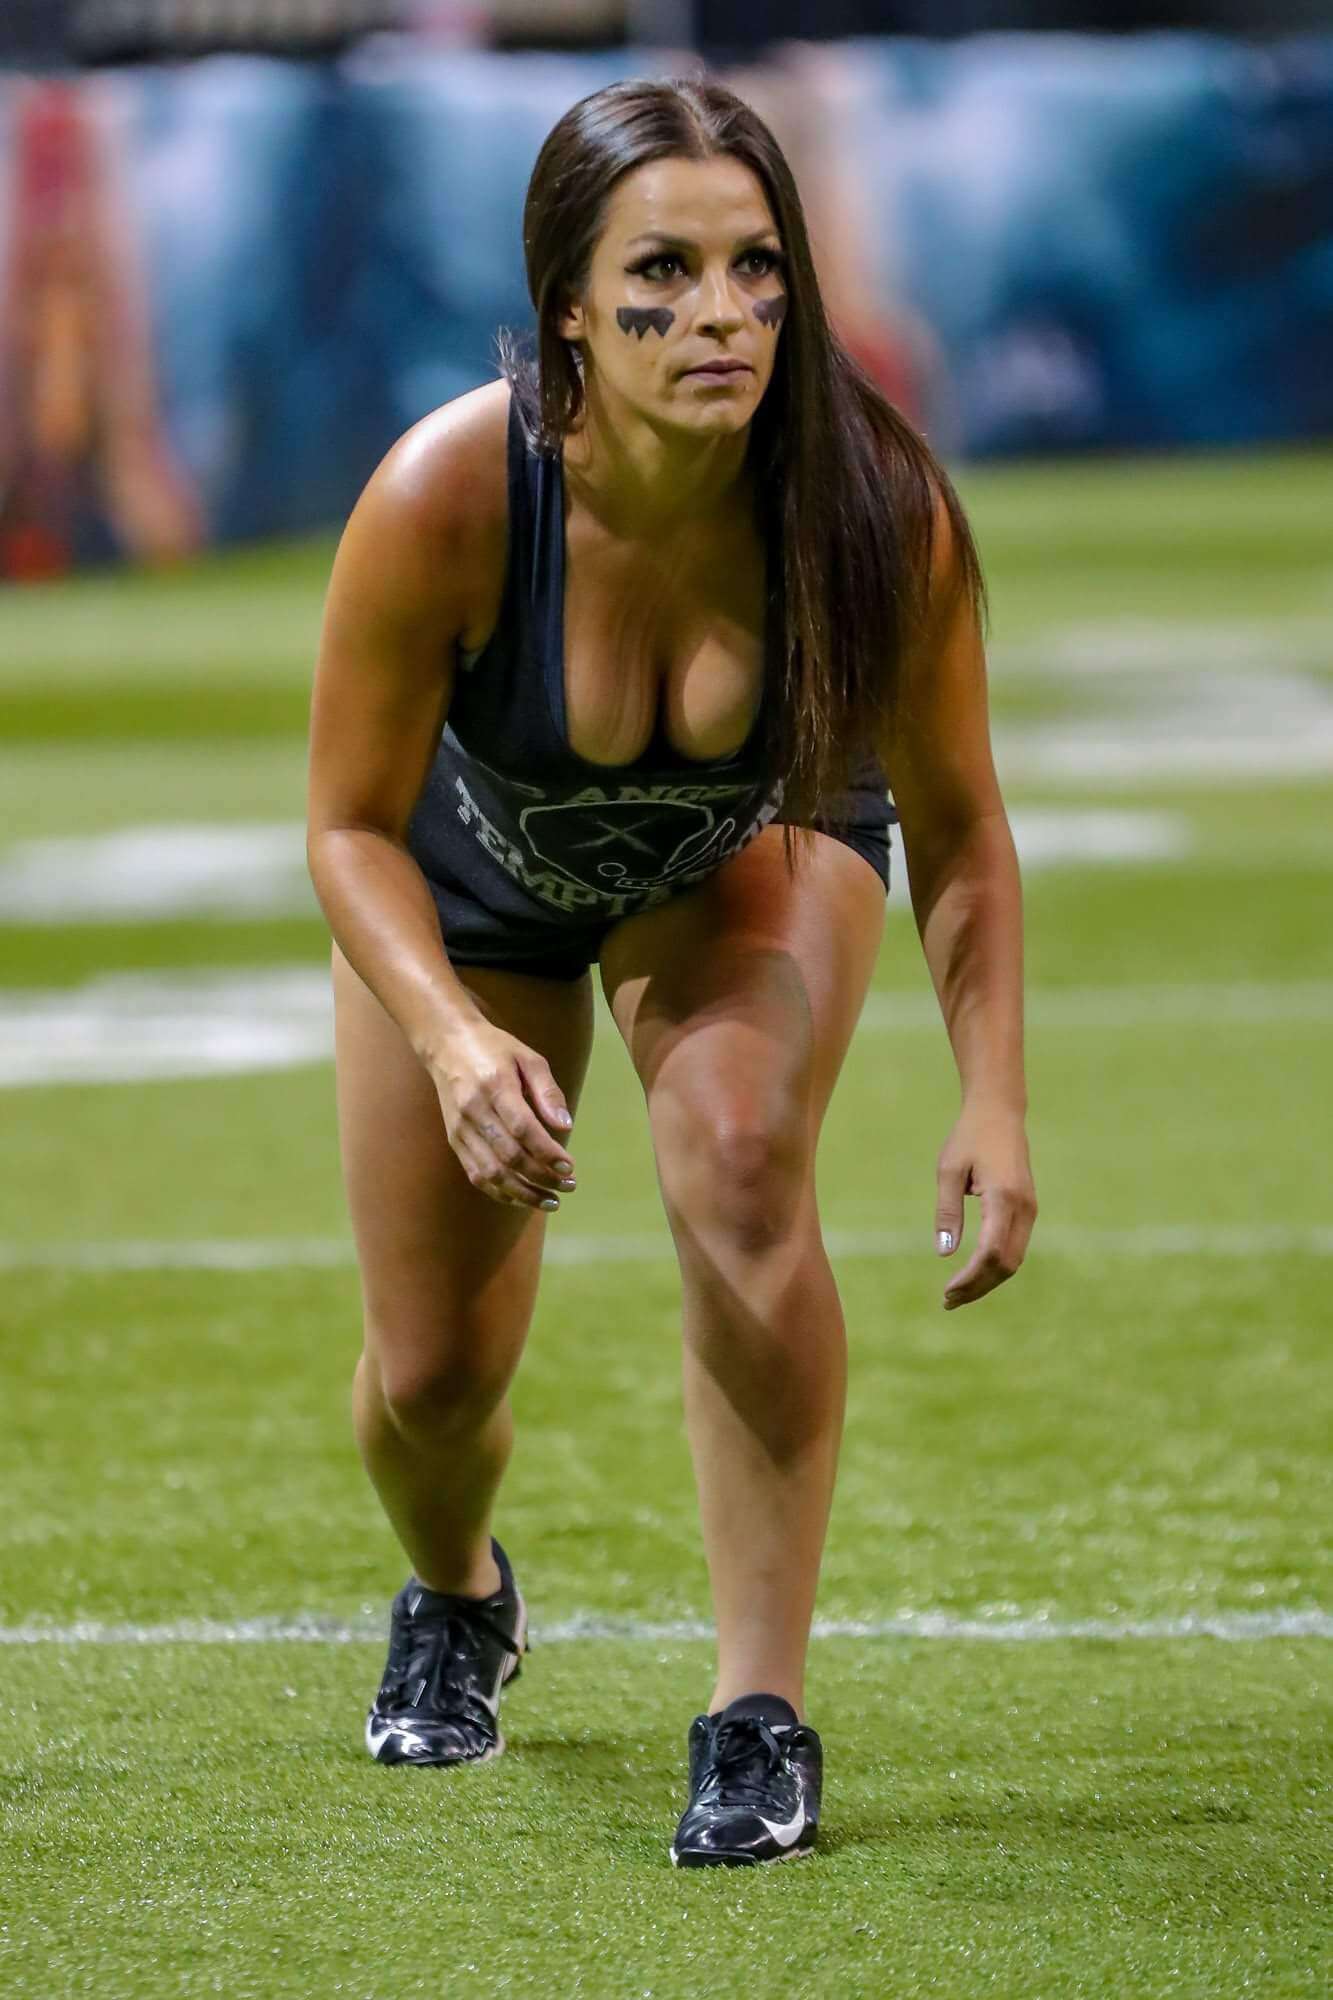 The Legends Football League Beautiful Women And Football, Need We Say Anymore! 154